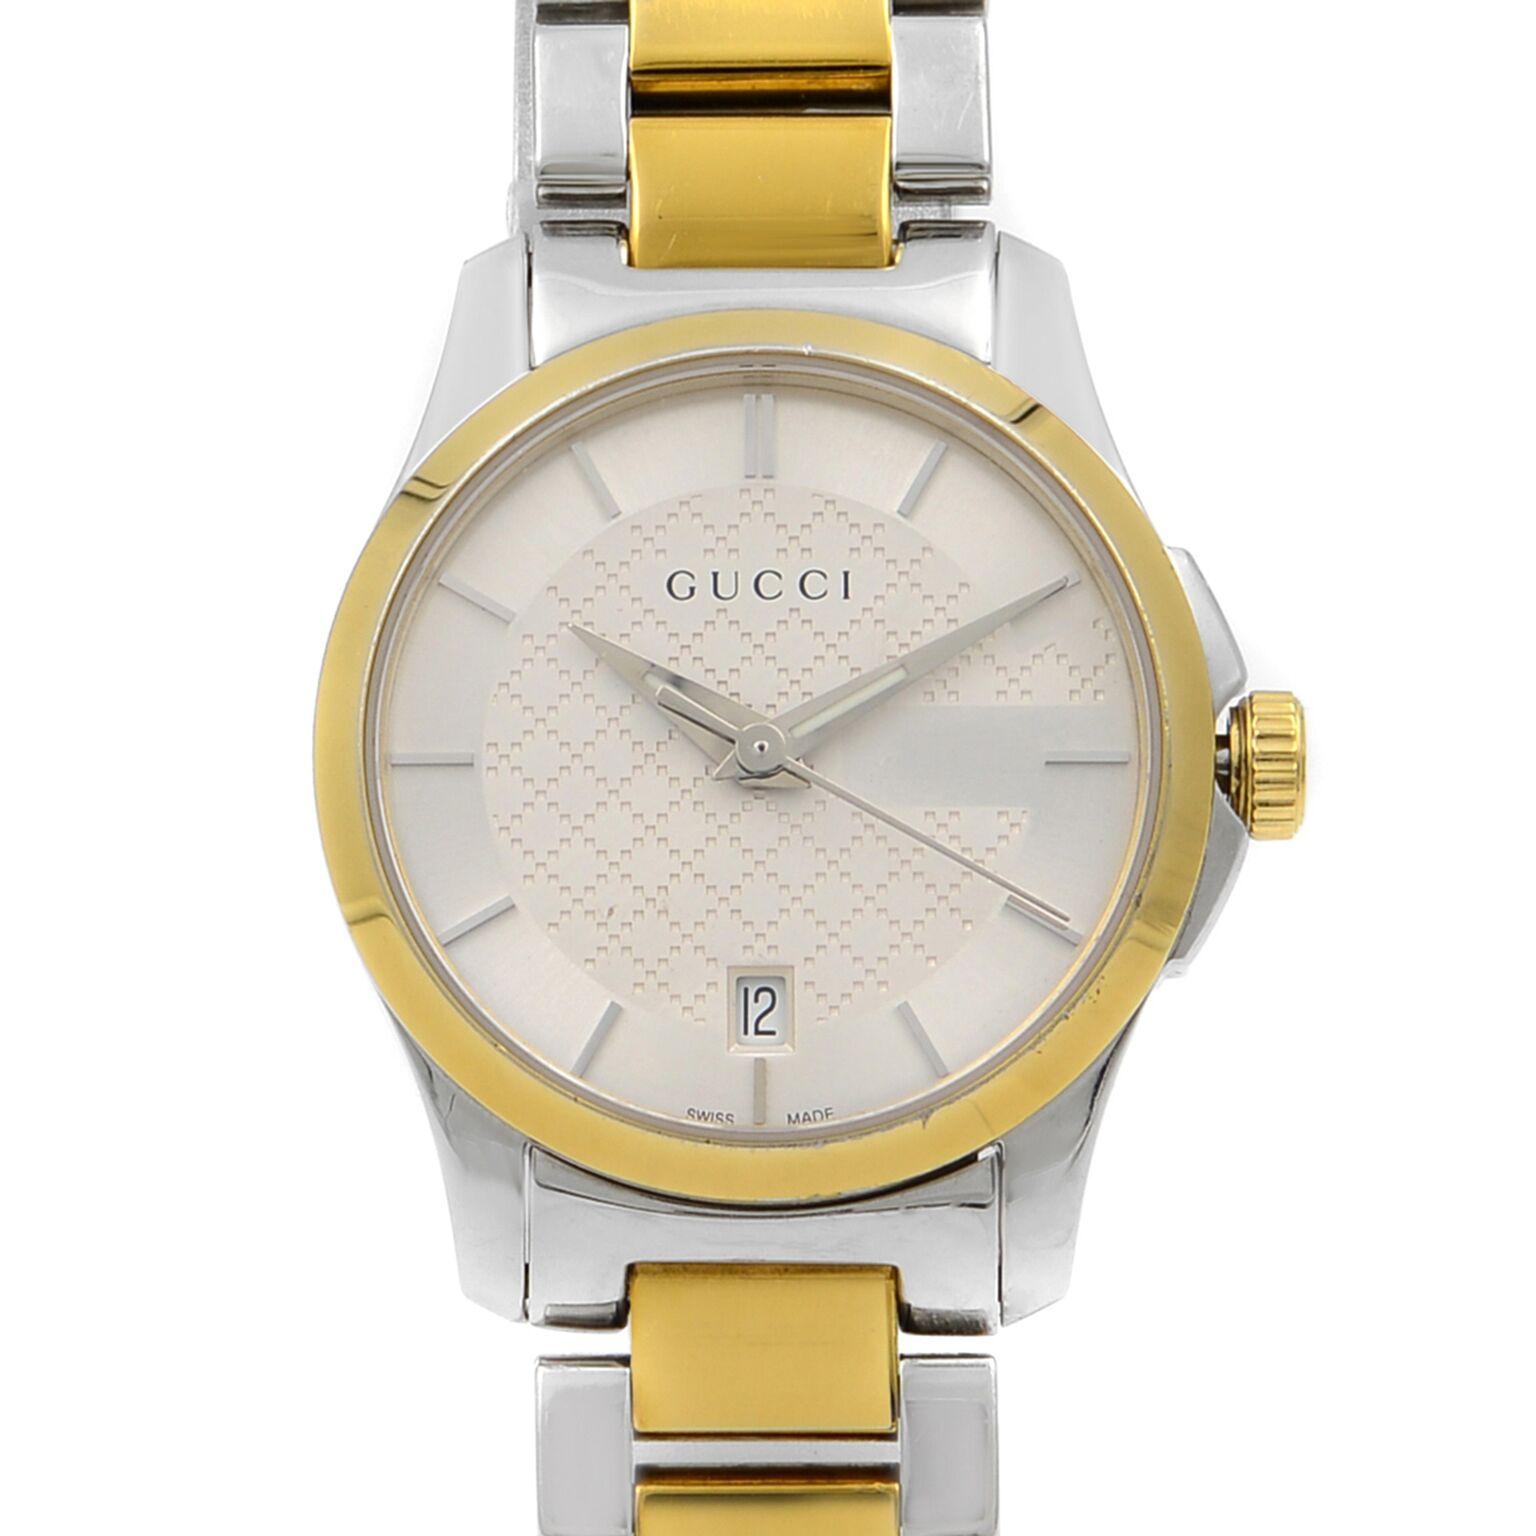 This pre-owned Gucci G-Timeless YA126531 is a beautiful Ladies timepiece that is powered by a quartz movement which is cased in a stainless steel case. It has a round shape face, date dial and has hand sticks style markers. It is completed with a